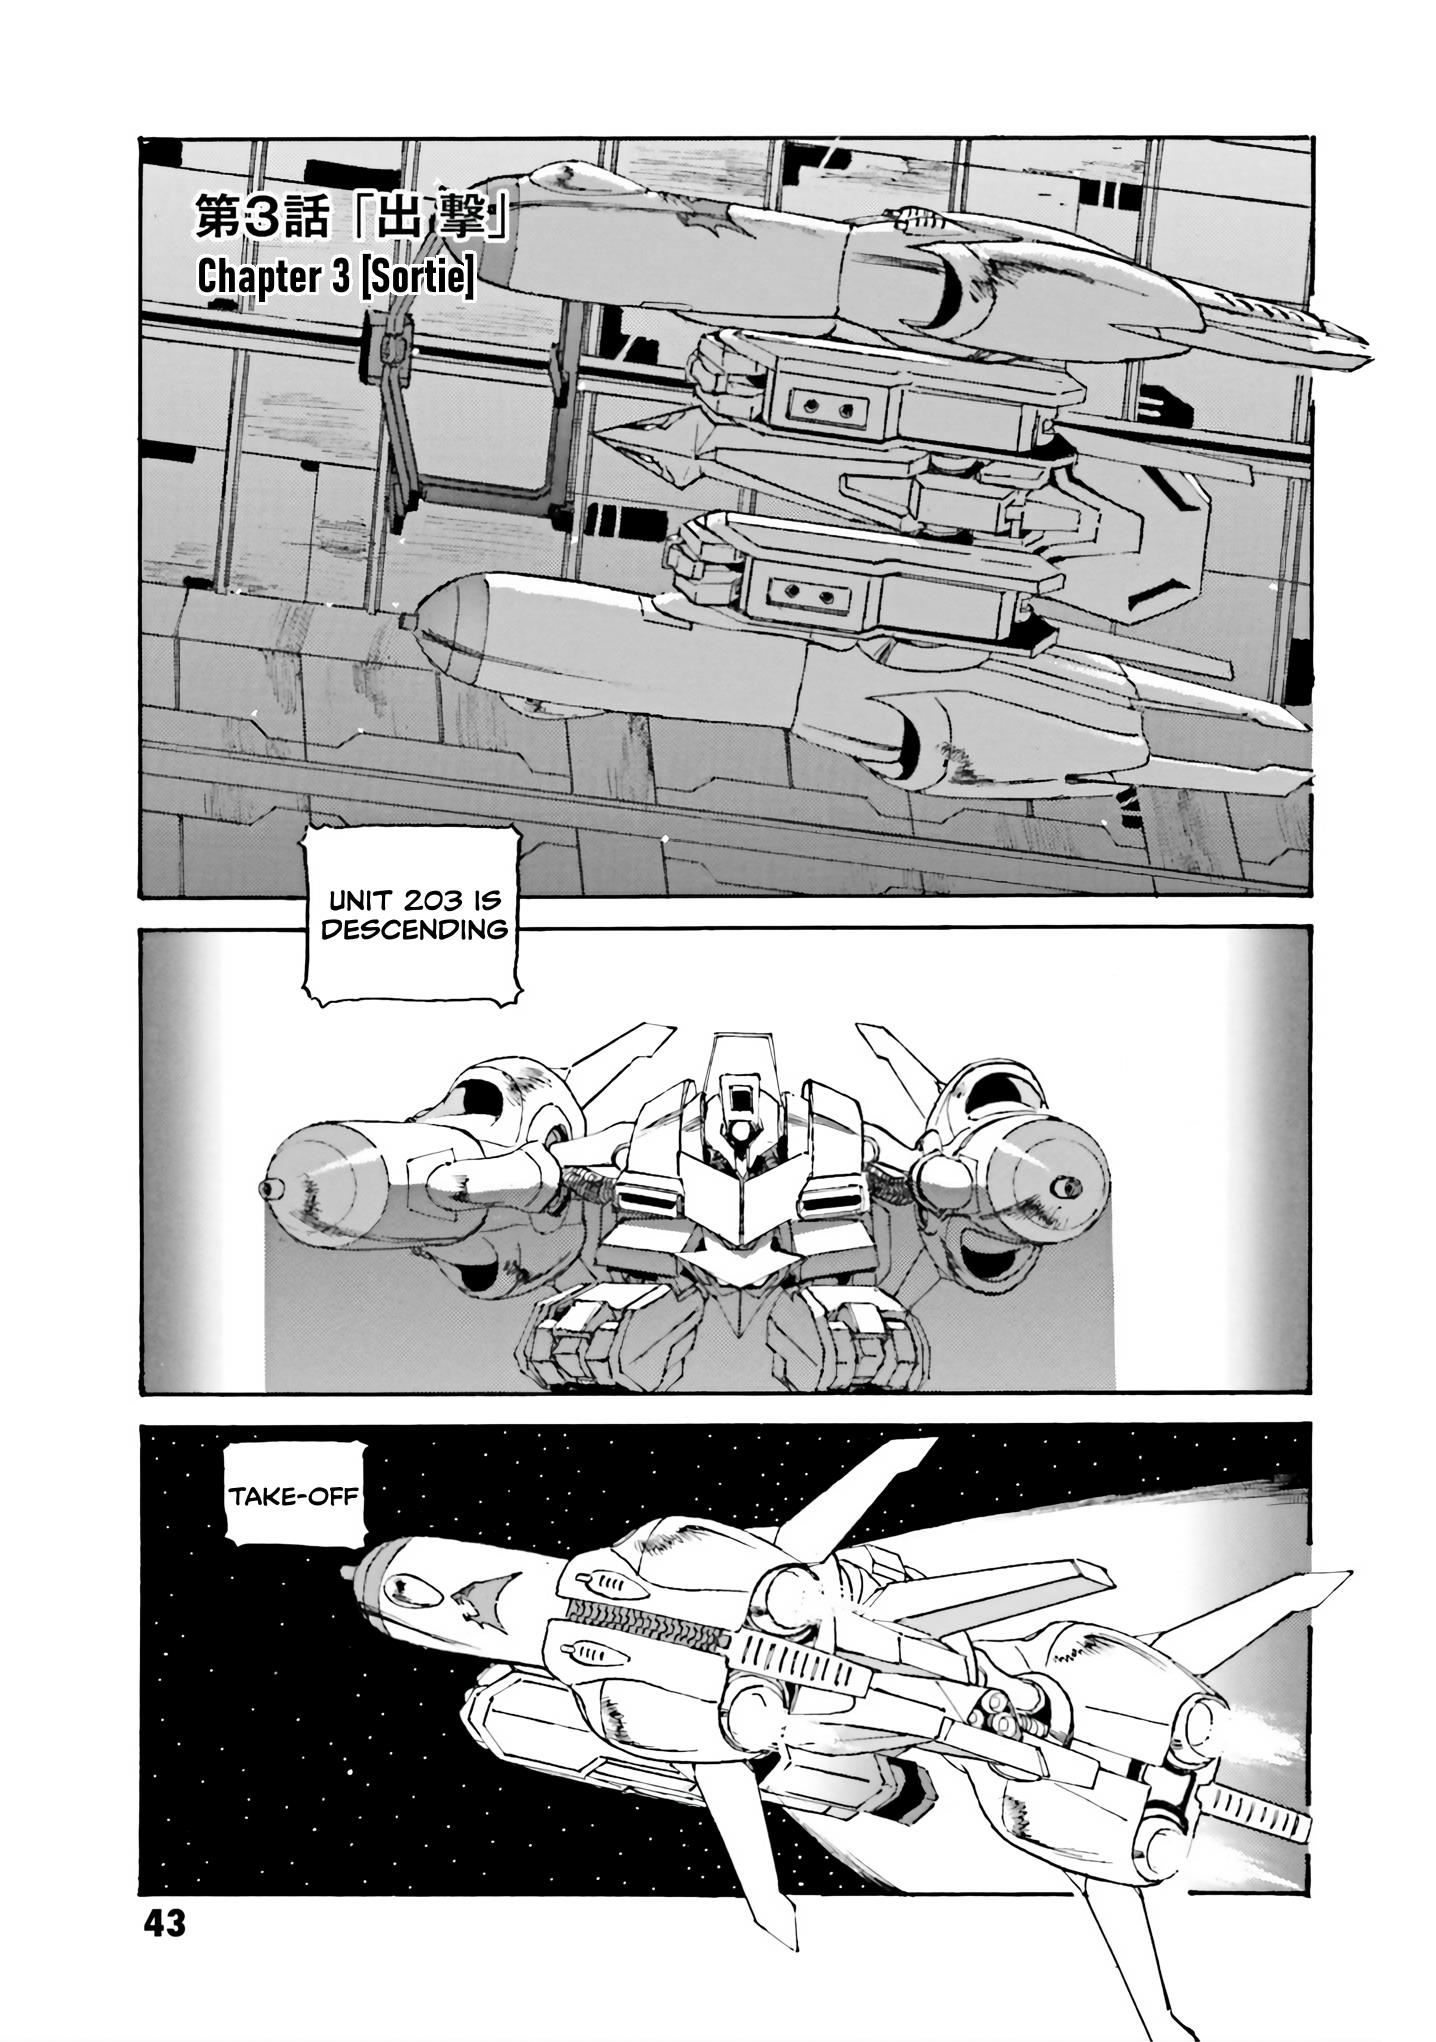 Mobile Suit Gundam: The Revival Of Zeon - Remnant One Vol.1 Chapter 3: Sortie - Picture 1